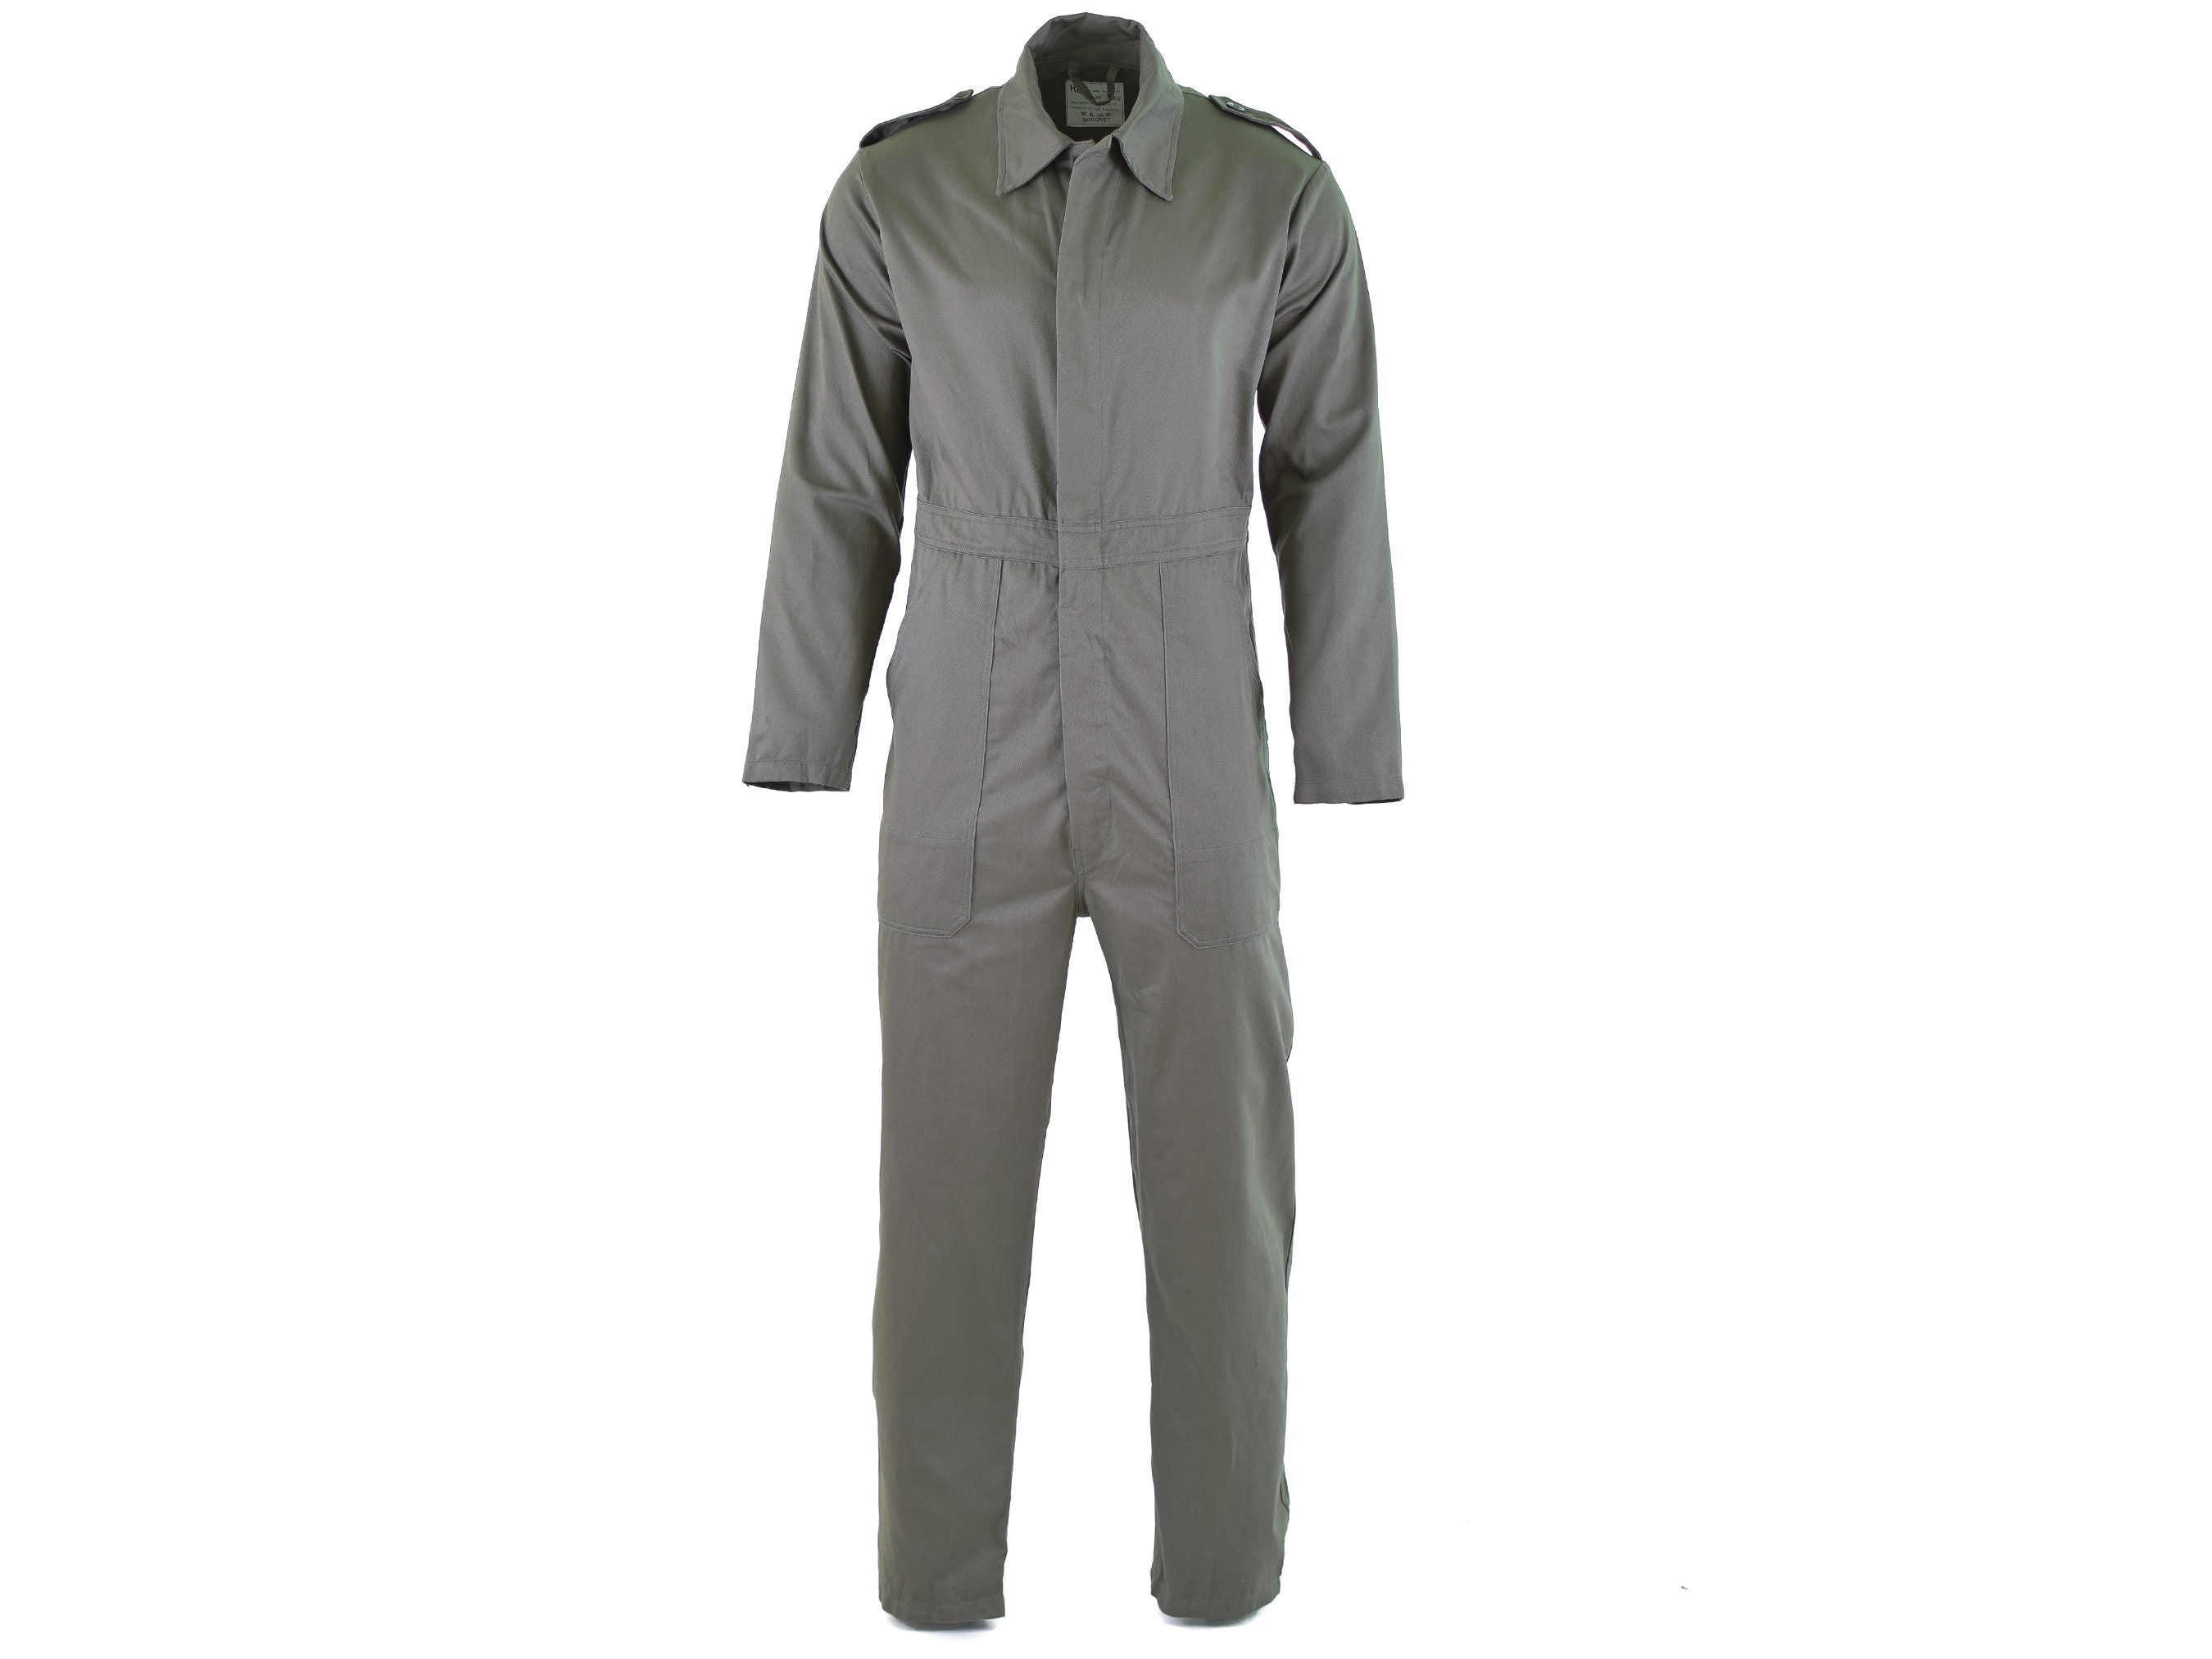 Halloween Express Men's Airforce Jumpsuit Costume - Size One Size Fits Most  - Green : Target